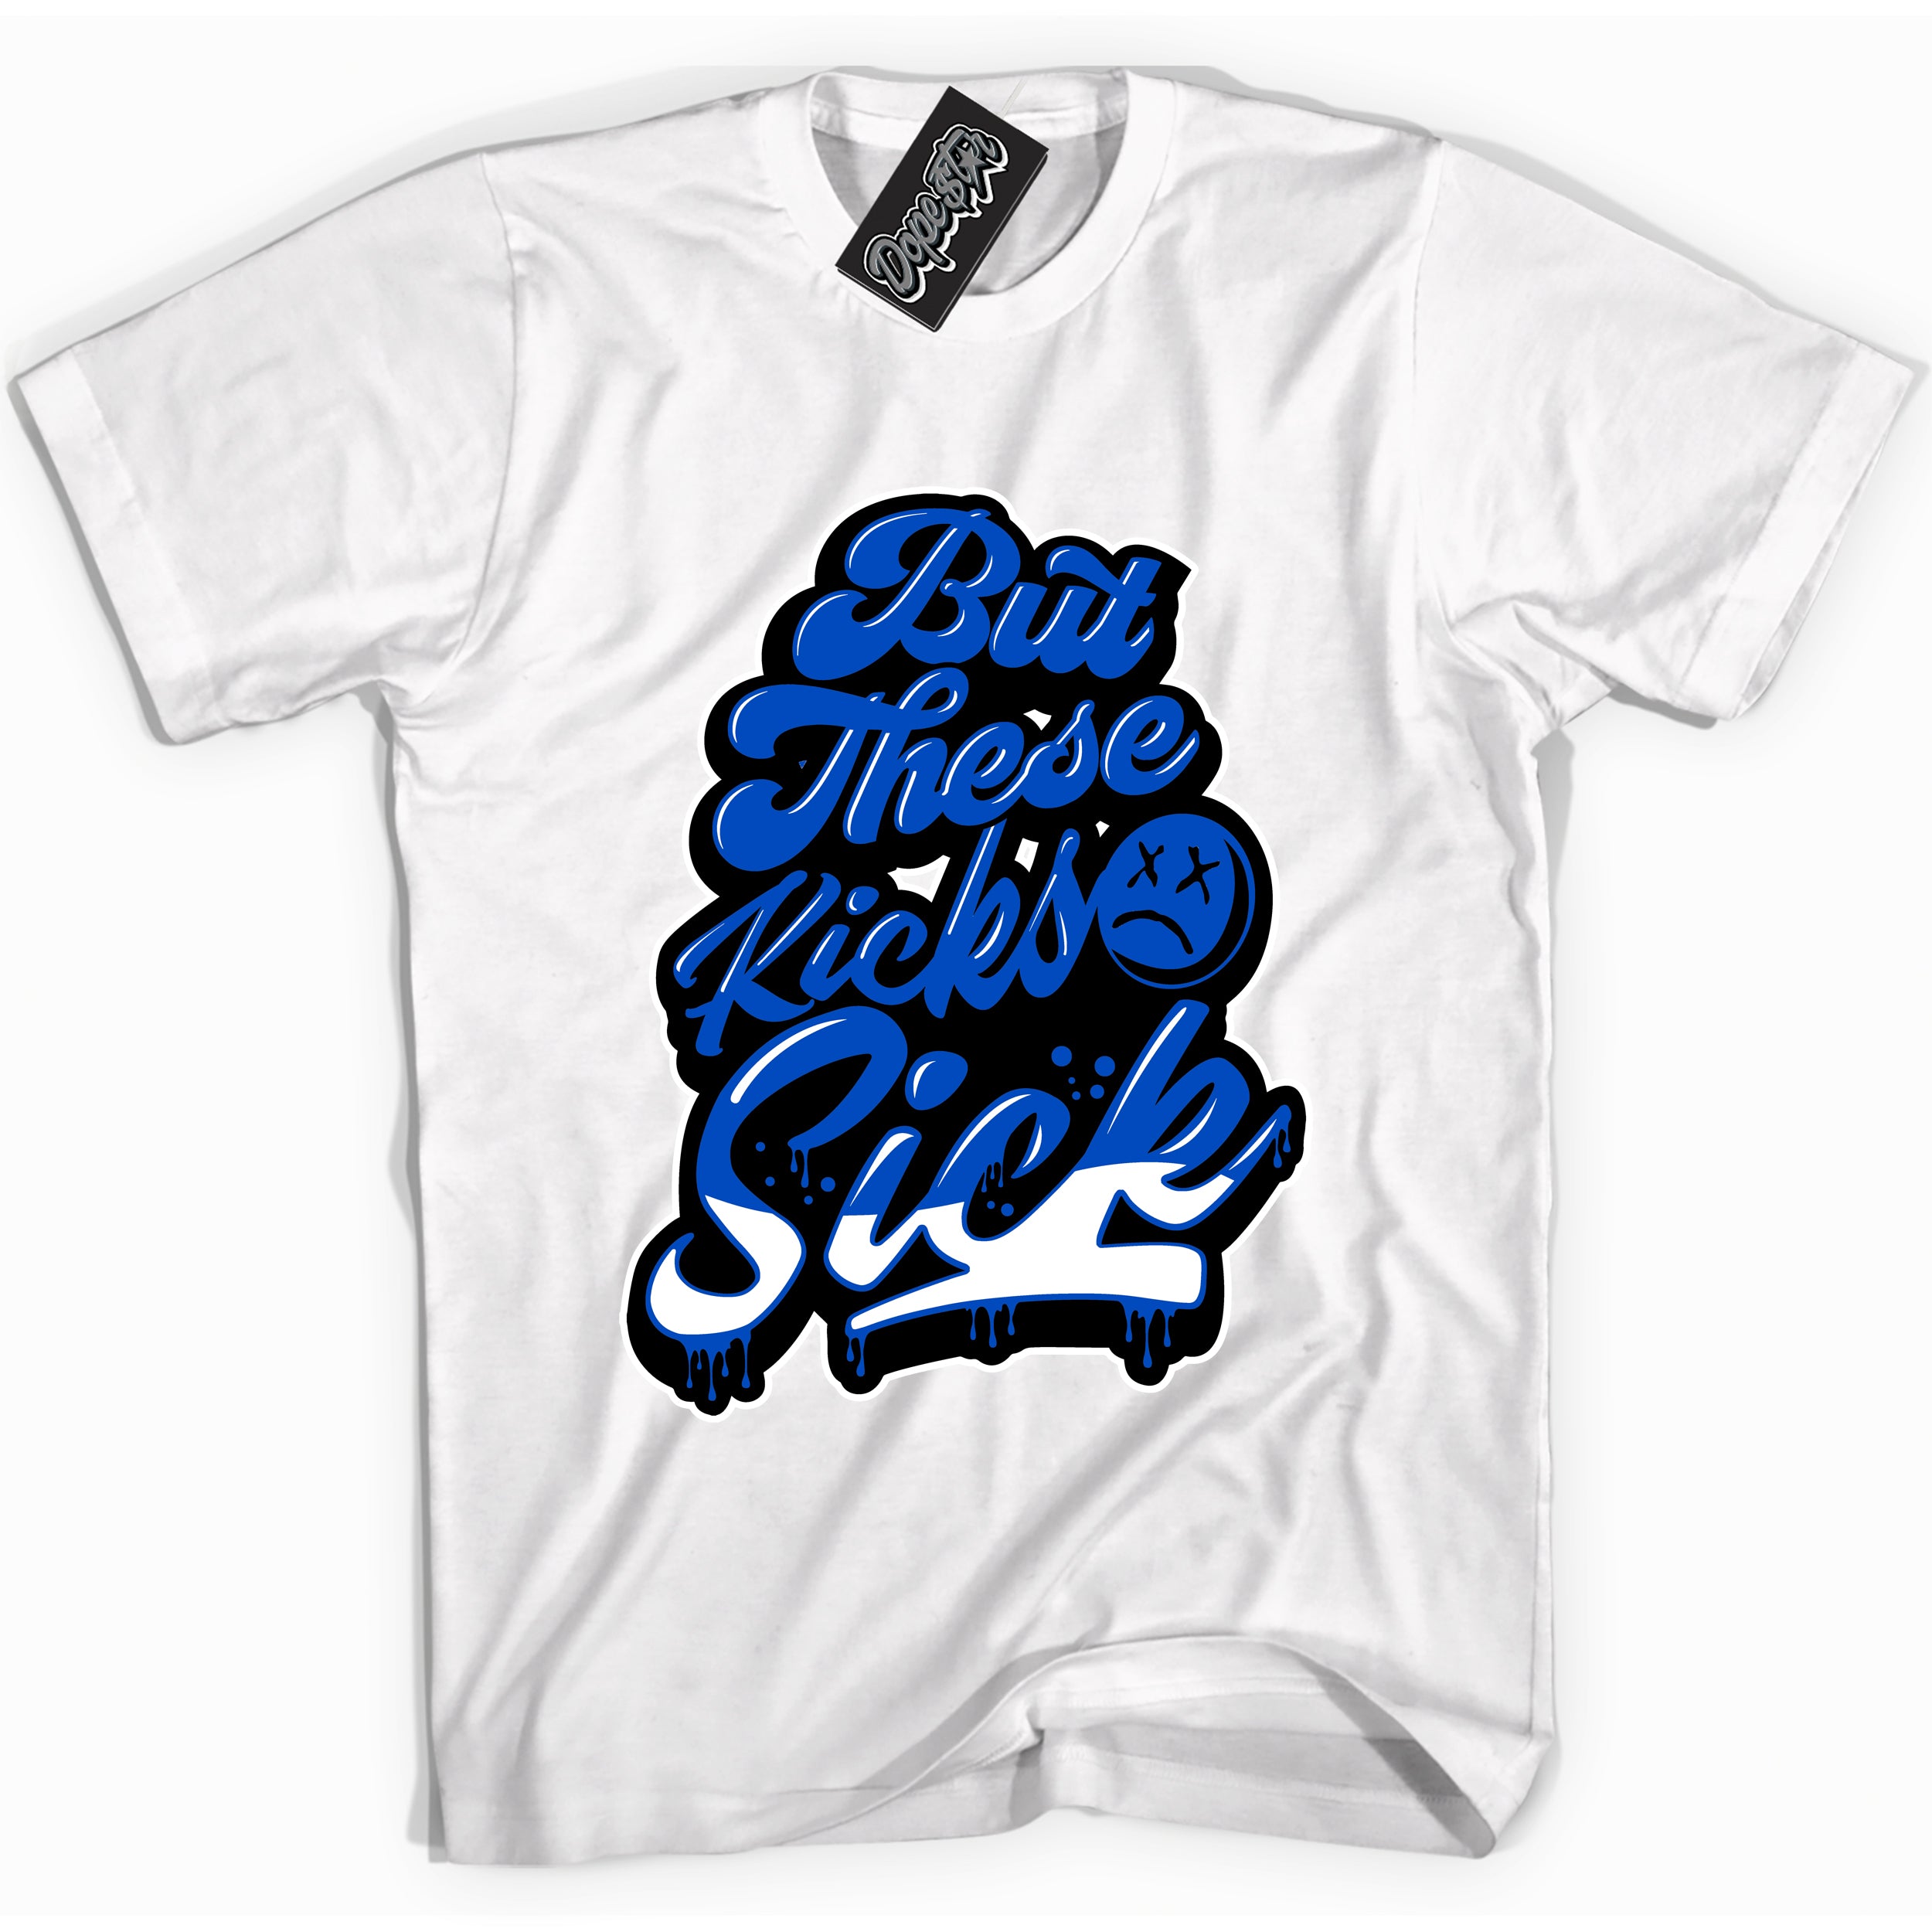 Cool White graphic tee with Kick Sick print, that perfectly matches OG Royal Reimagined 1s sneakers 